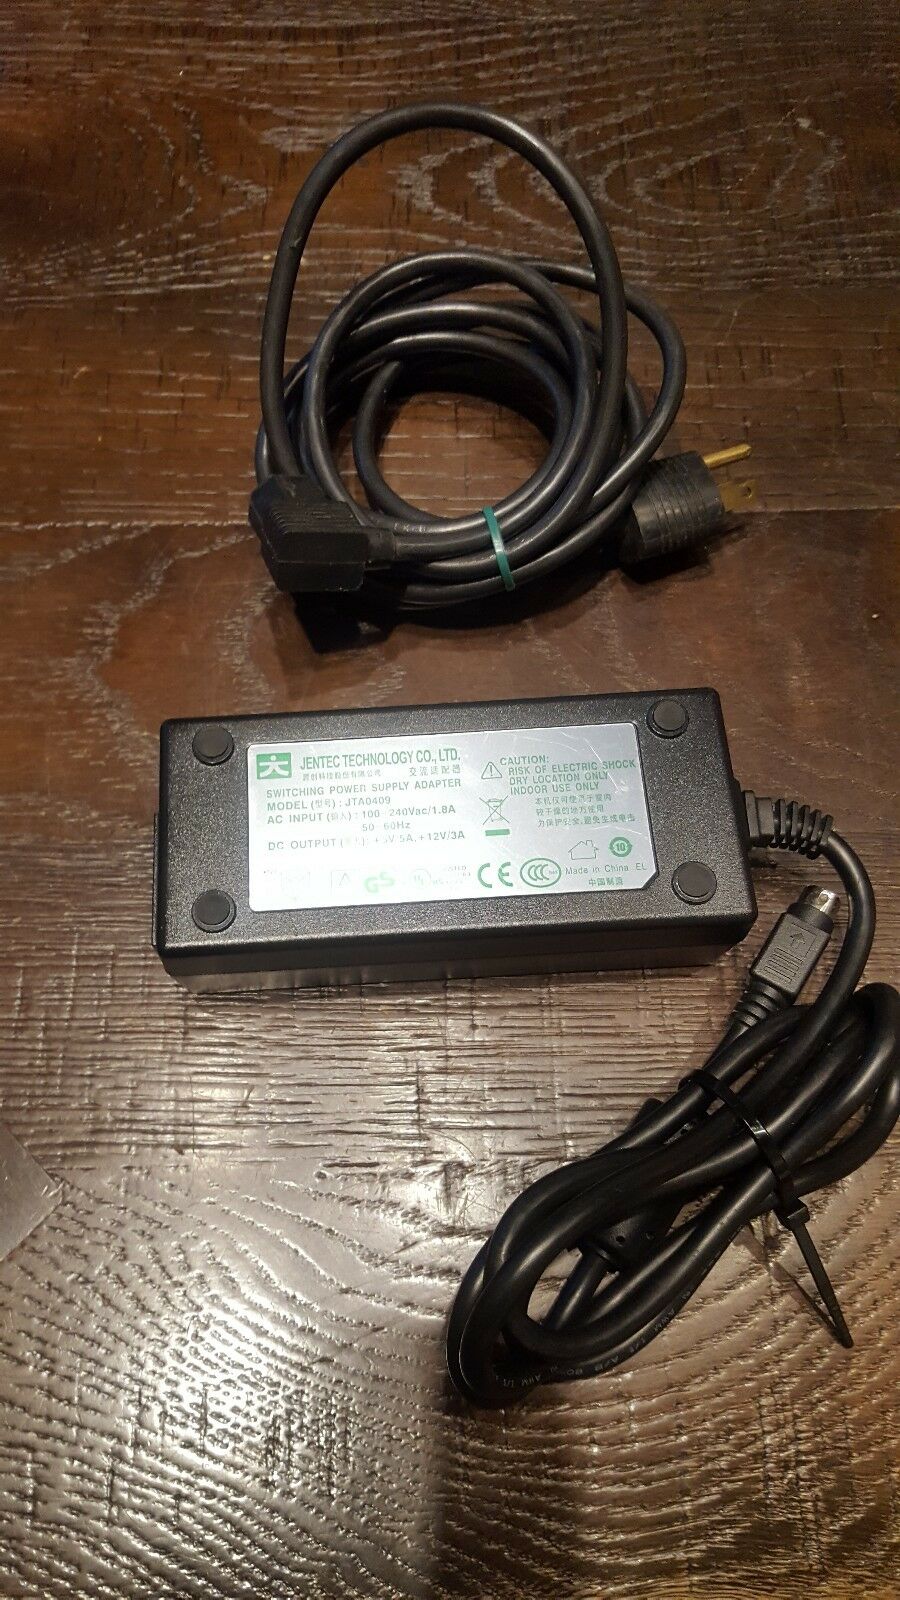 NEW JENTEC TECHNOLOGY JTA0409 5V-5A 12V-3A SWITCHING AC POWER ADAPTER 4-PIN Specification: Brand: